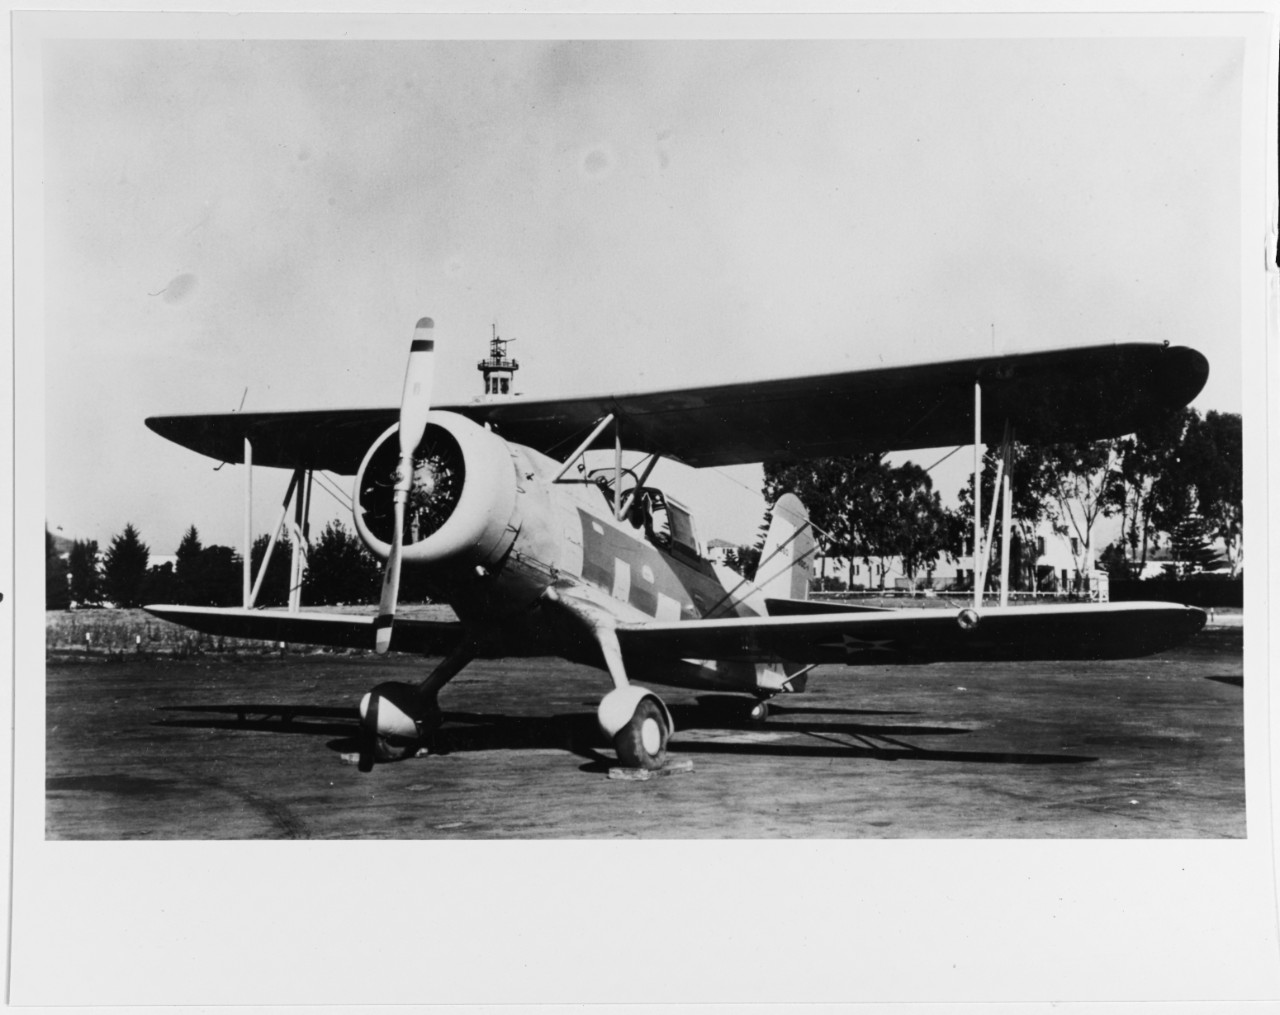 Photo #: NH 83925  Curtiss SOC-1 scout observation plane